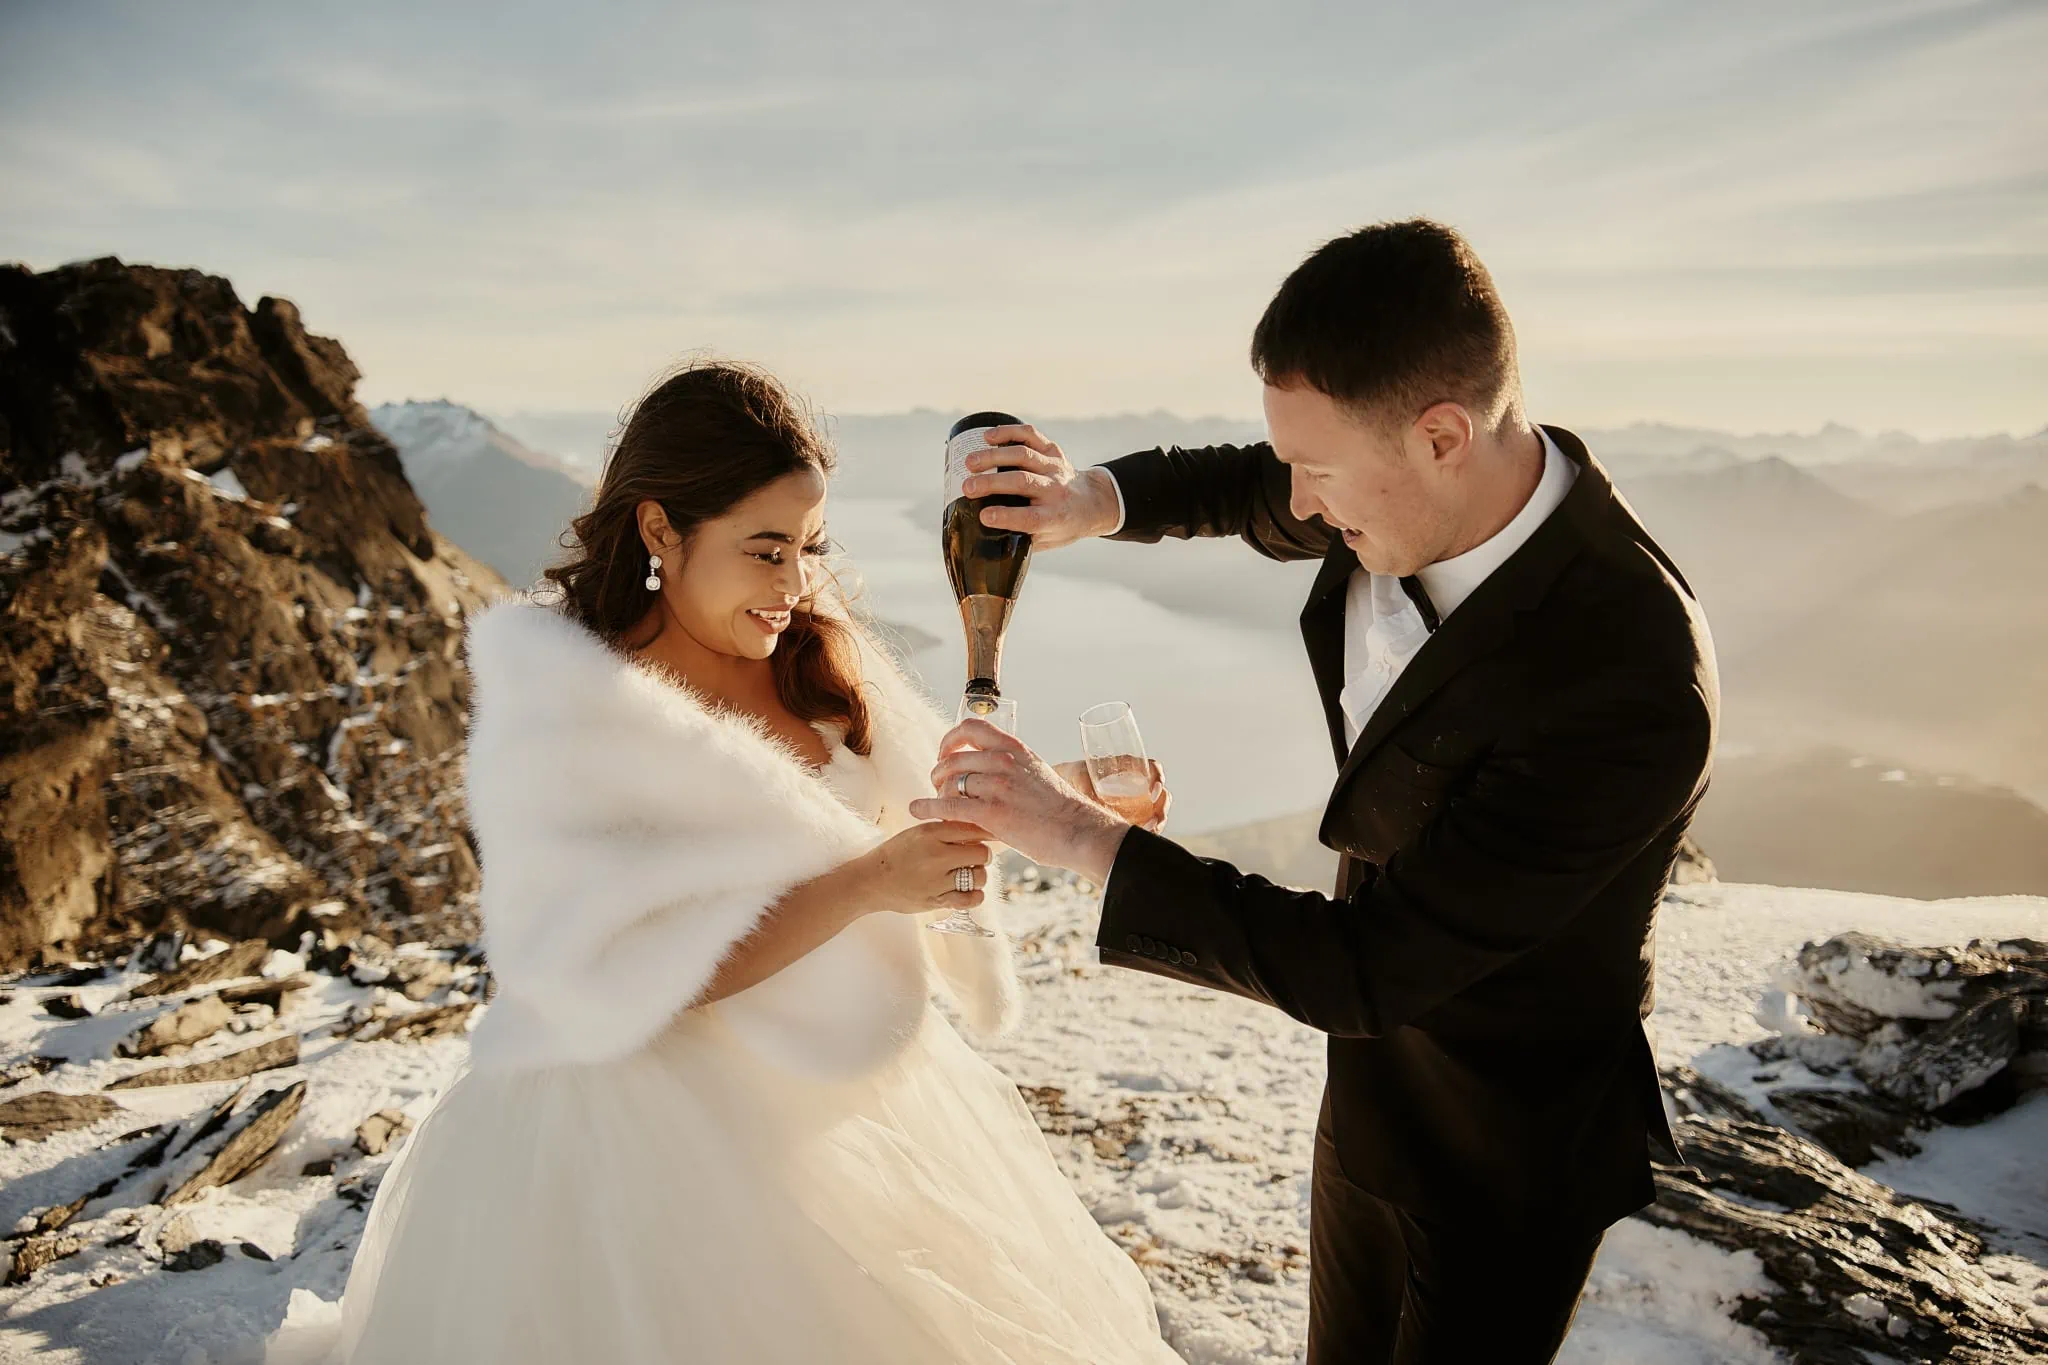 Queenstown New Zealand Elopement Wedding Photographer - Amy and Callum's Queenstown Heli Pre Wedding Shoot captures the couple pouring champagne on top of a snowy mountain.